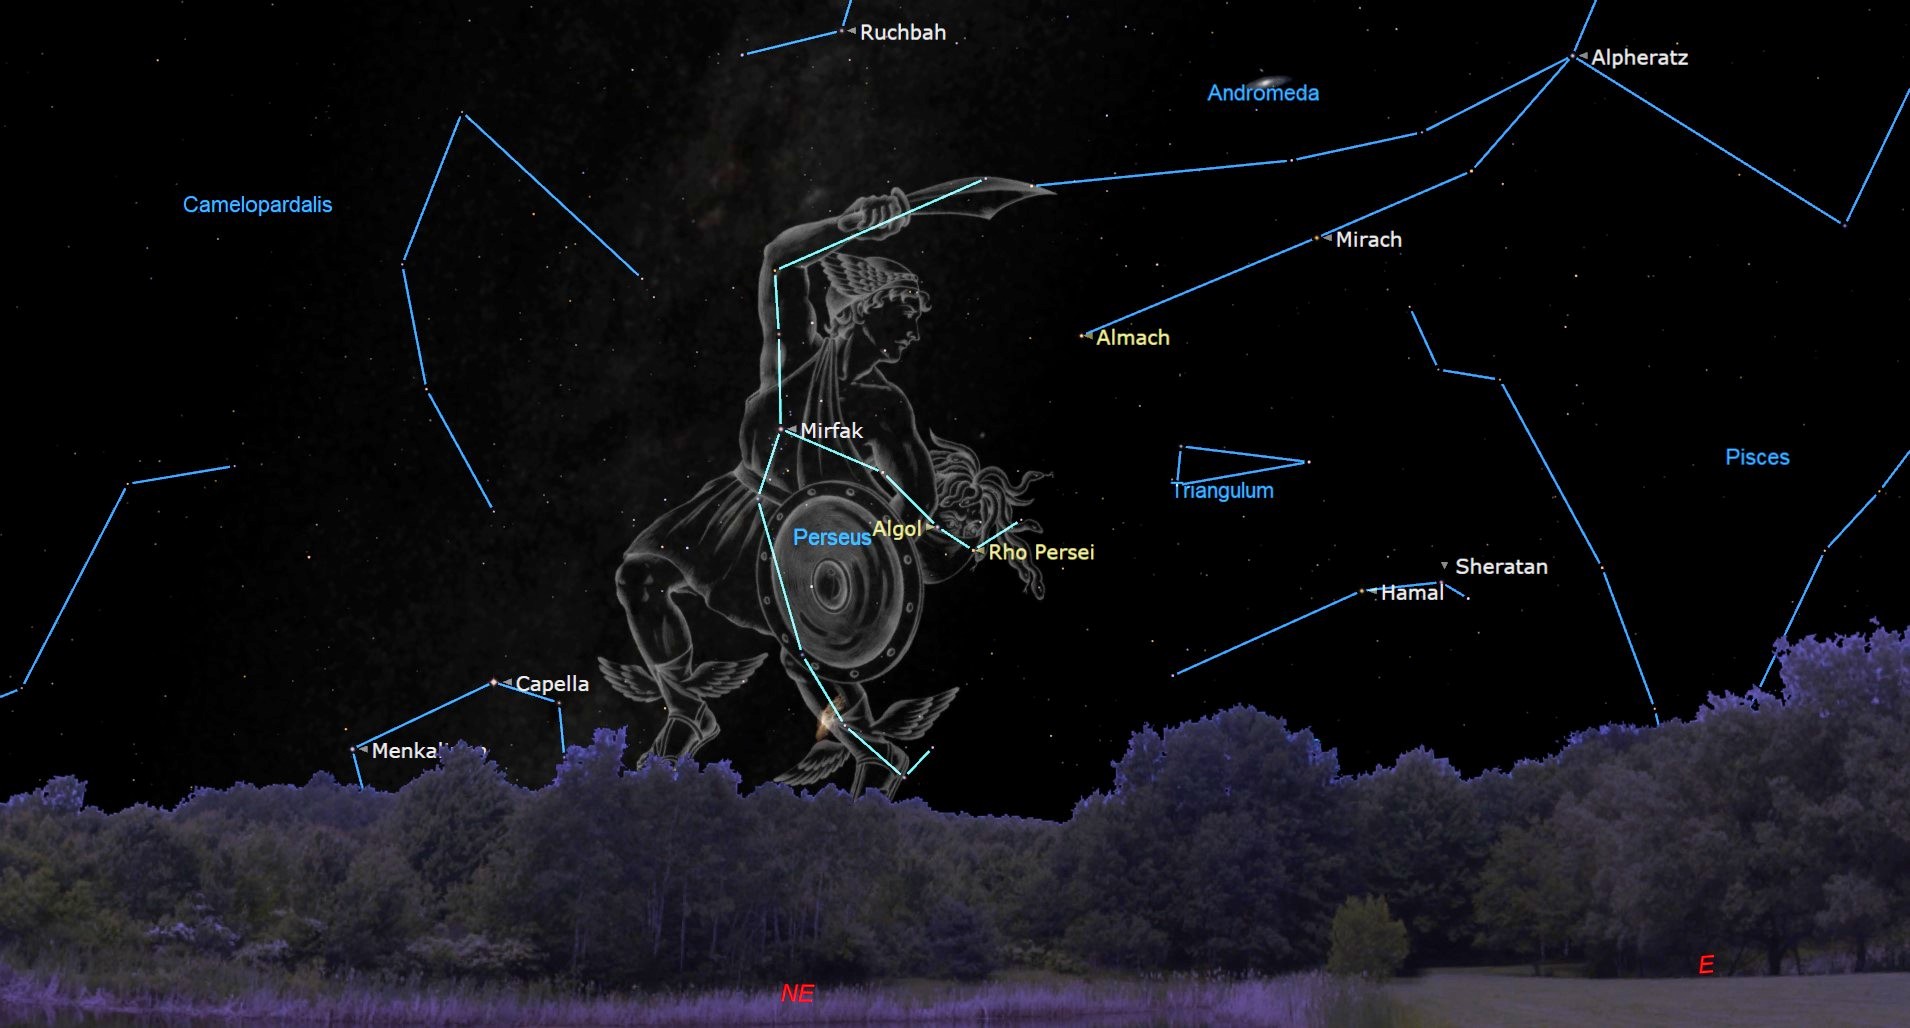 In the constellation of Perseus, Algol, also designated Beta Persei, marks the glowing eye of Medusa from Greek mythology. The star is among the most accessible variable stars for skywatchers. During a ten-hour period that repeats every 2 days, 20 hours, and 49 minutes, Algol dims noticeably and re-brightens by about a third.